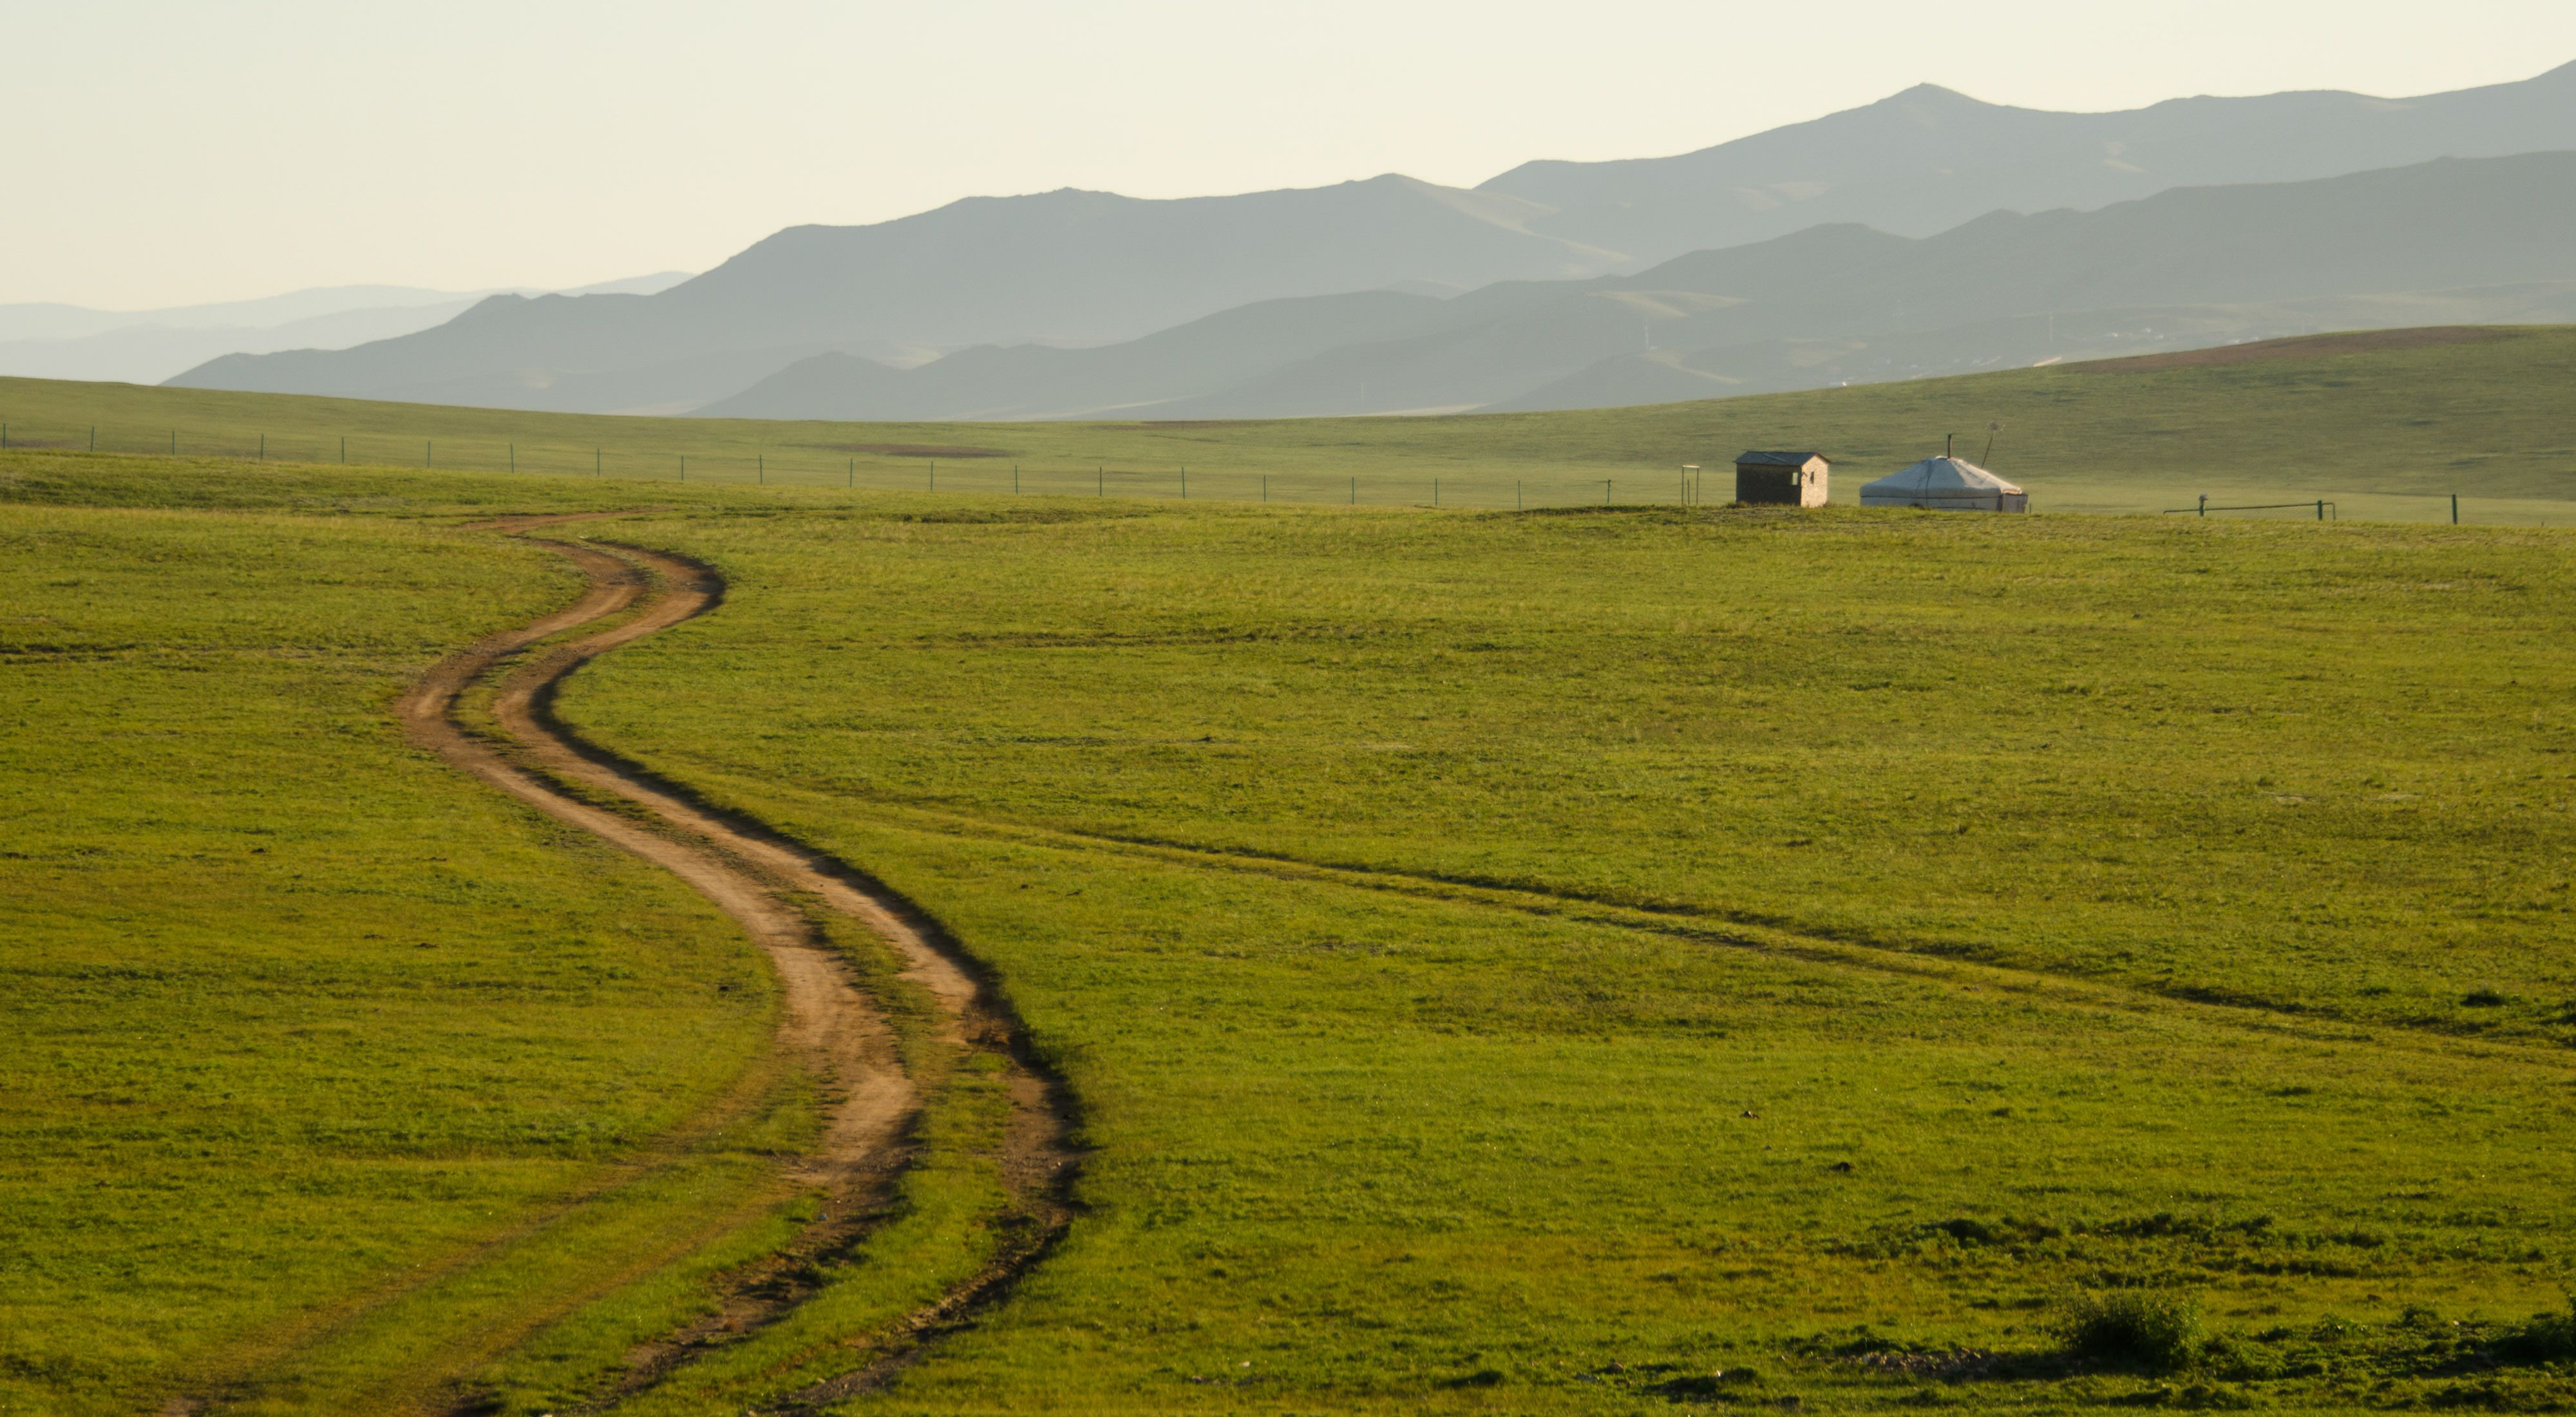 on the open grasslands of Mongolia in central Asia